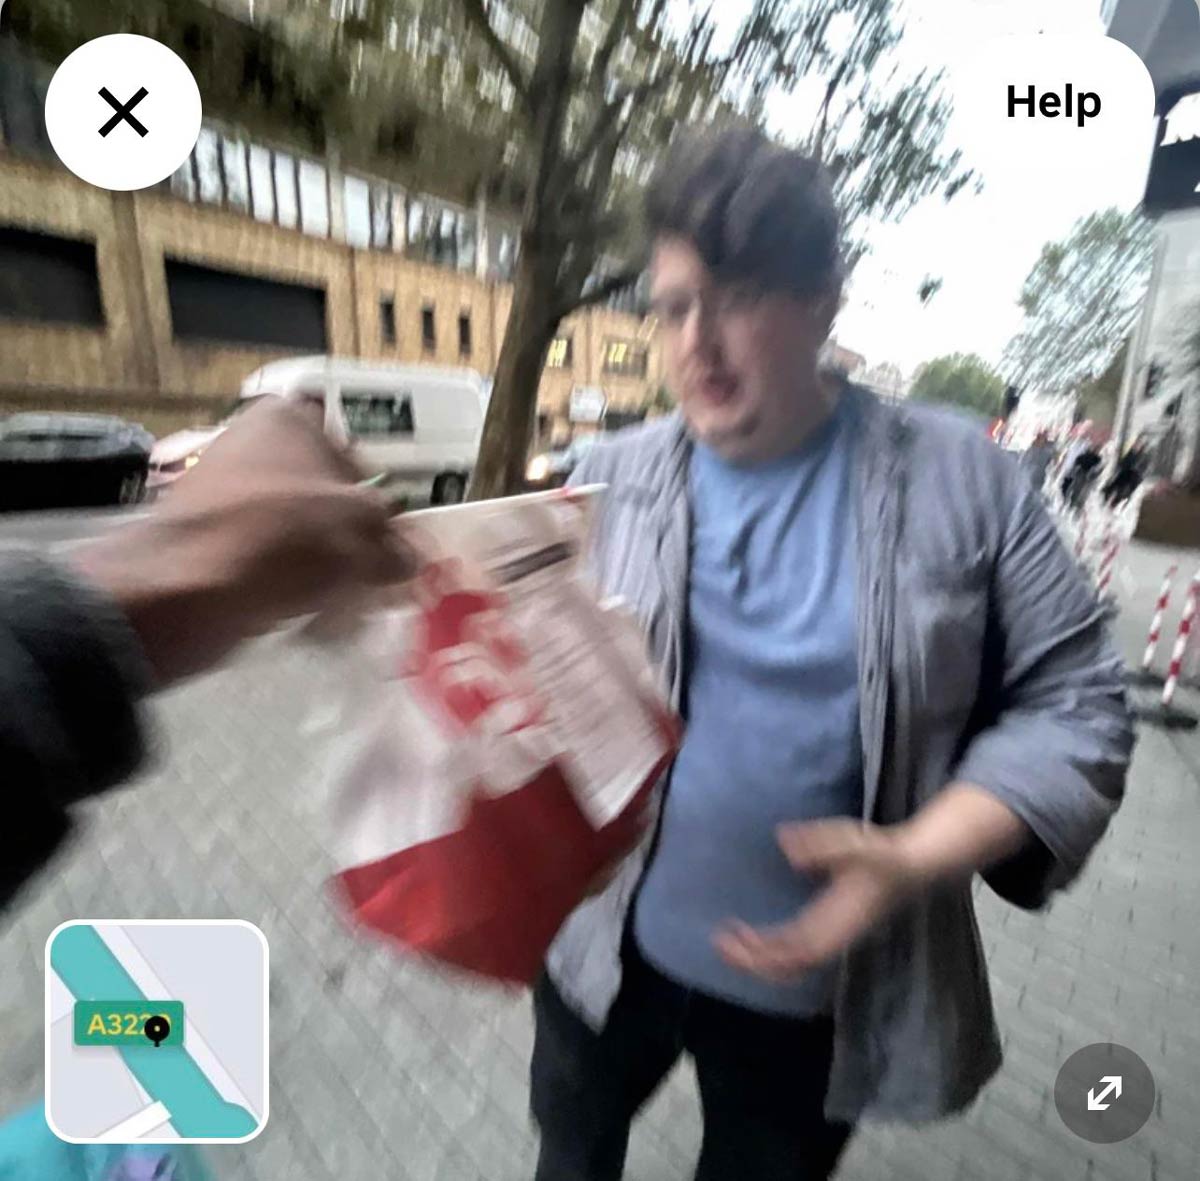 My ubereats driver took a picture of me